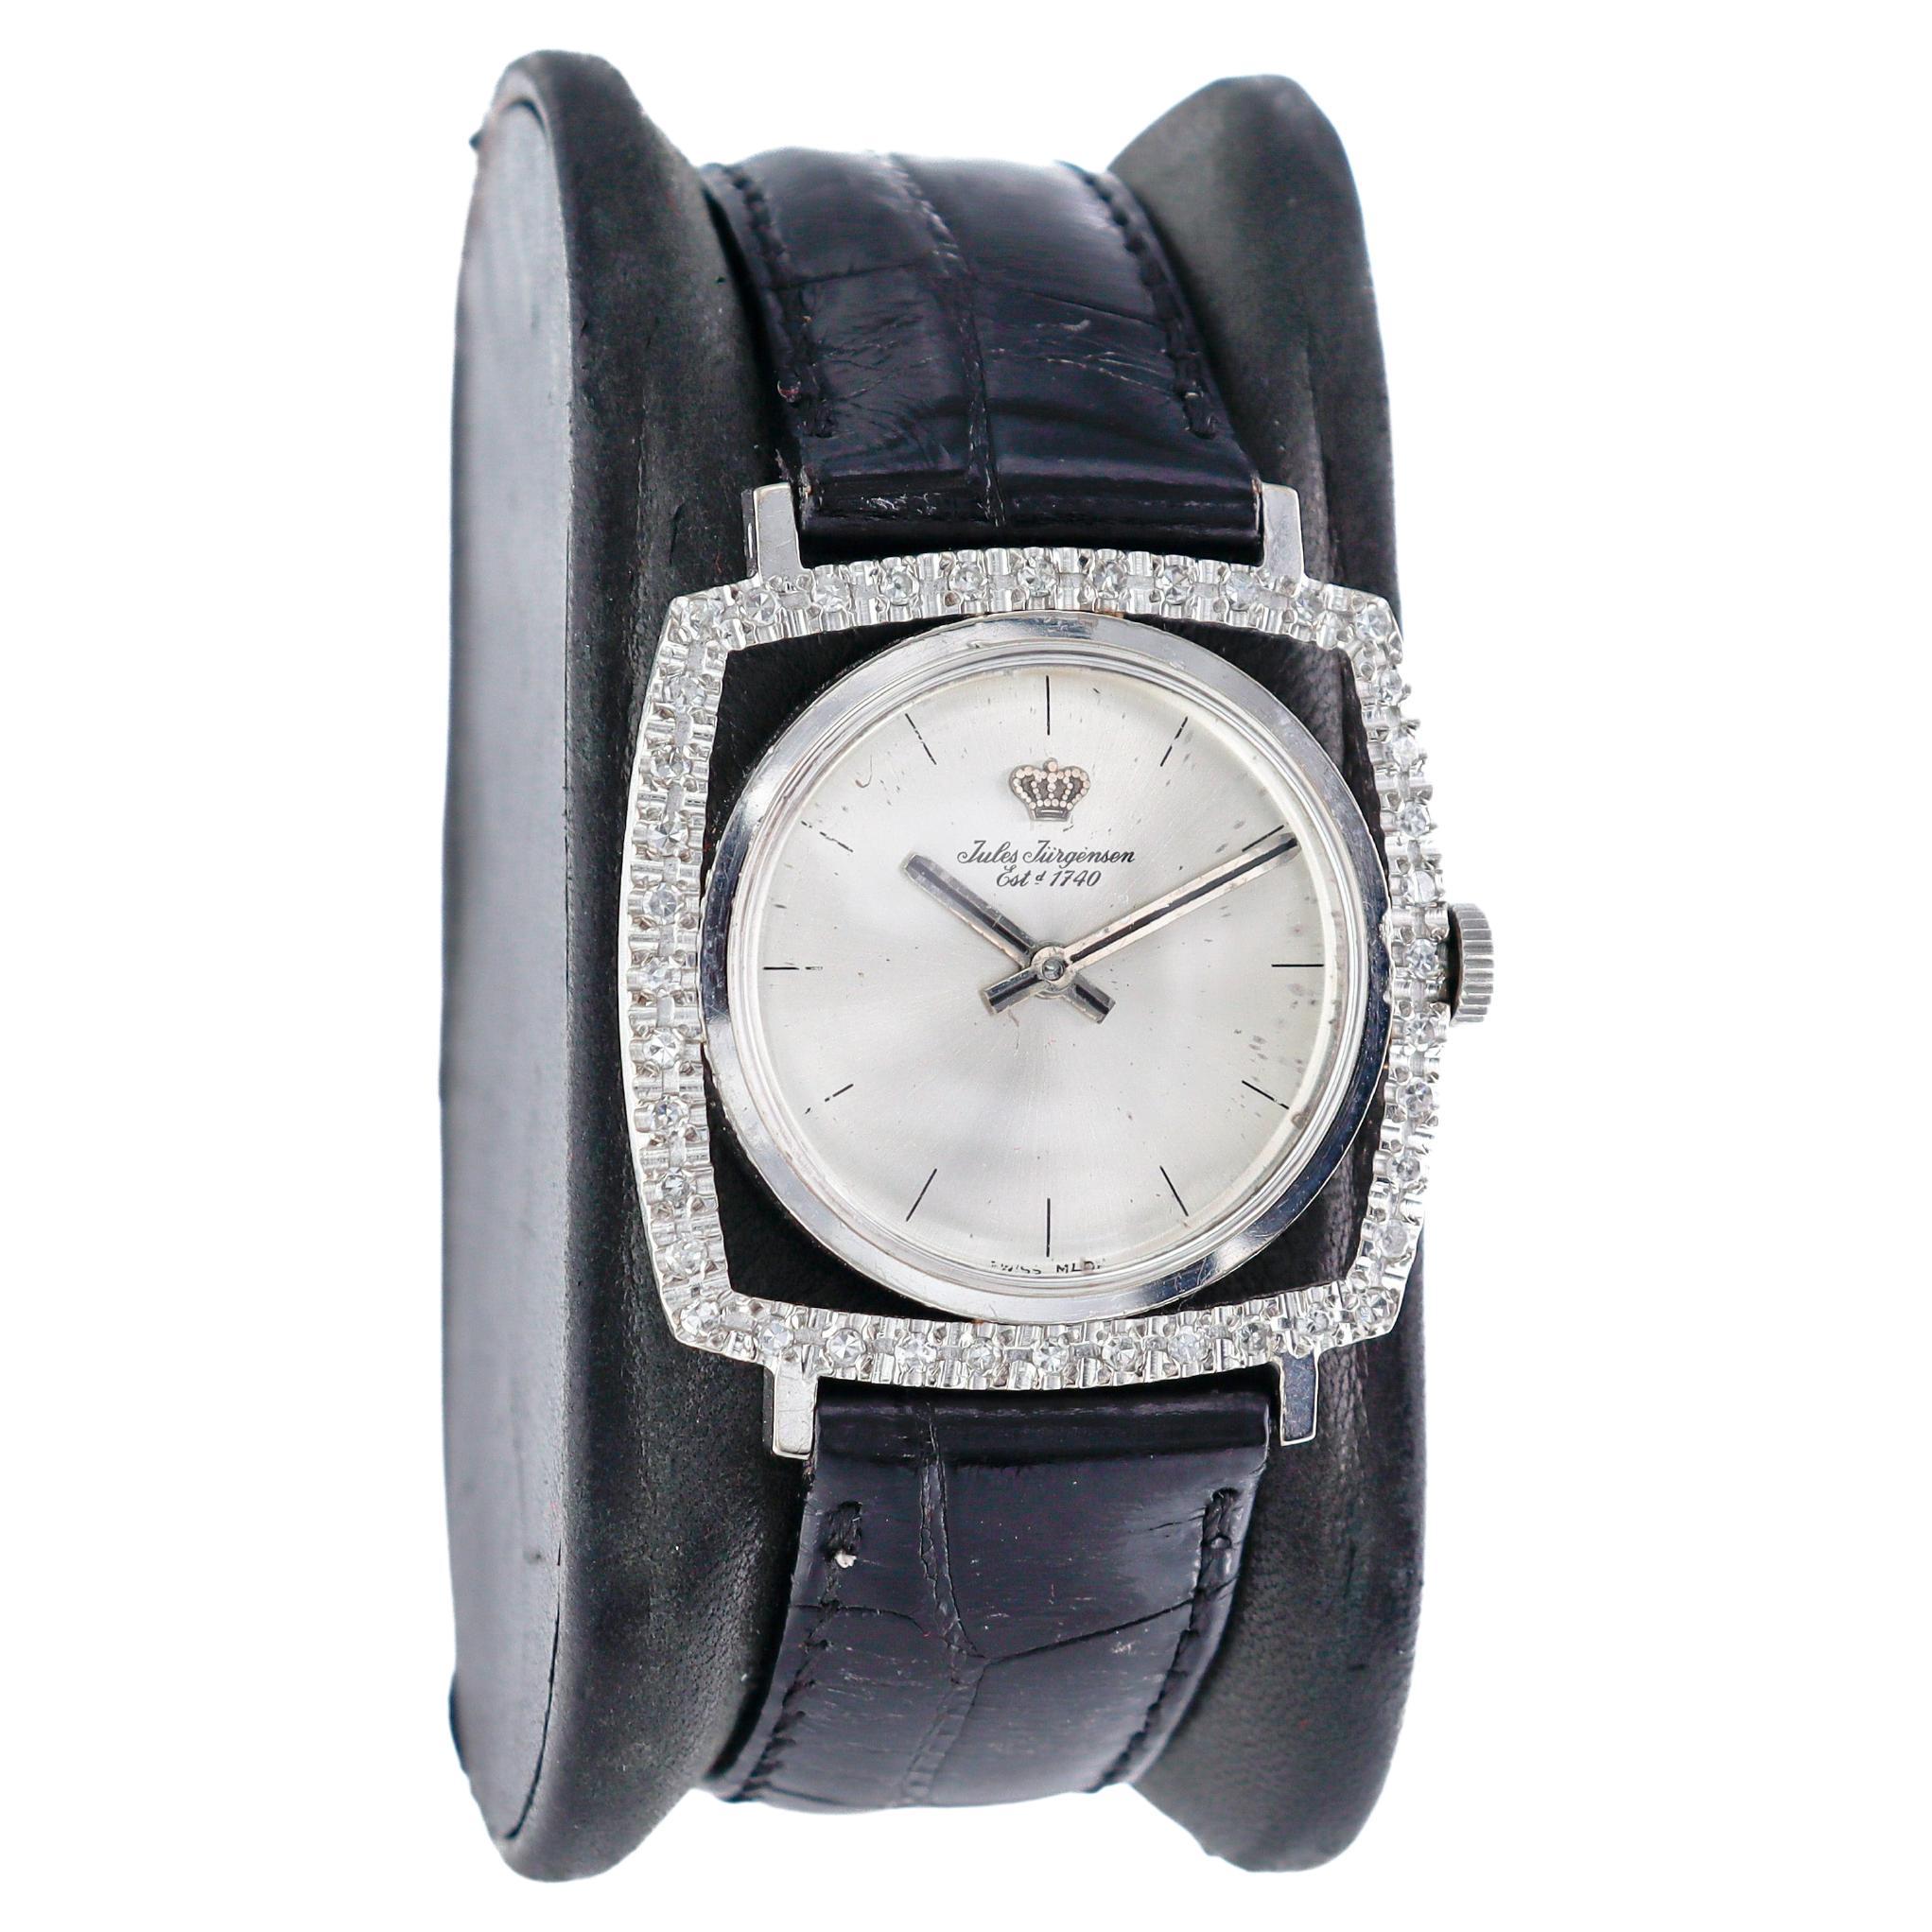 FACTORY / HOUSE: Jules Jurgensen
STYLE / REFERENCE: Mid Century / Cushion Shape
METAL / MATERIAL: 18Kt. White Gold 
CIRCA / YEAR: 1960's
DIMENSIONS / SIZE: Length 35mm X Diameter 30mm
MOVEMENT / CALIBER:  Automatic Winding /  17 Jewels 
DIAL /